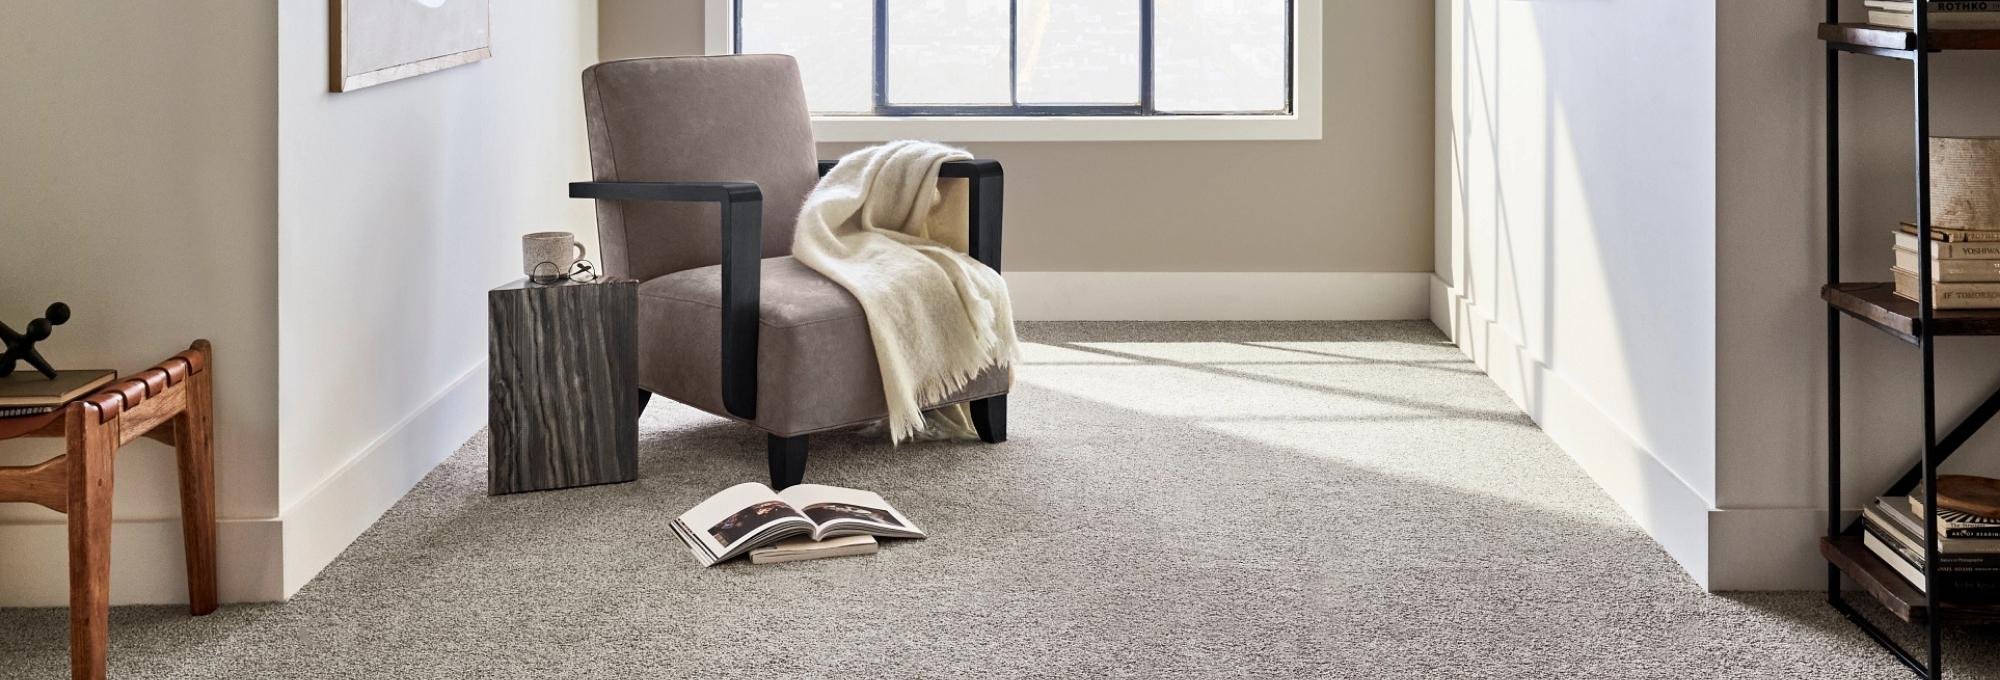 Cozy space with carpet from Classic Carpets located in Midland Texas